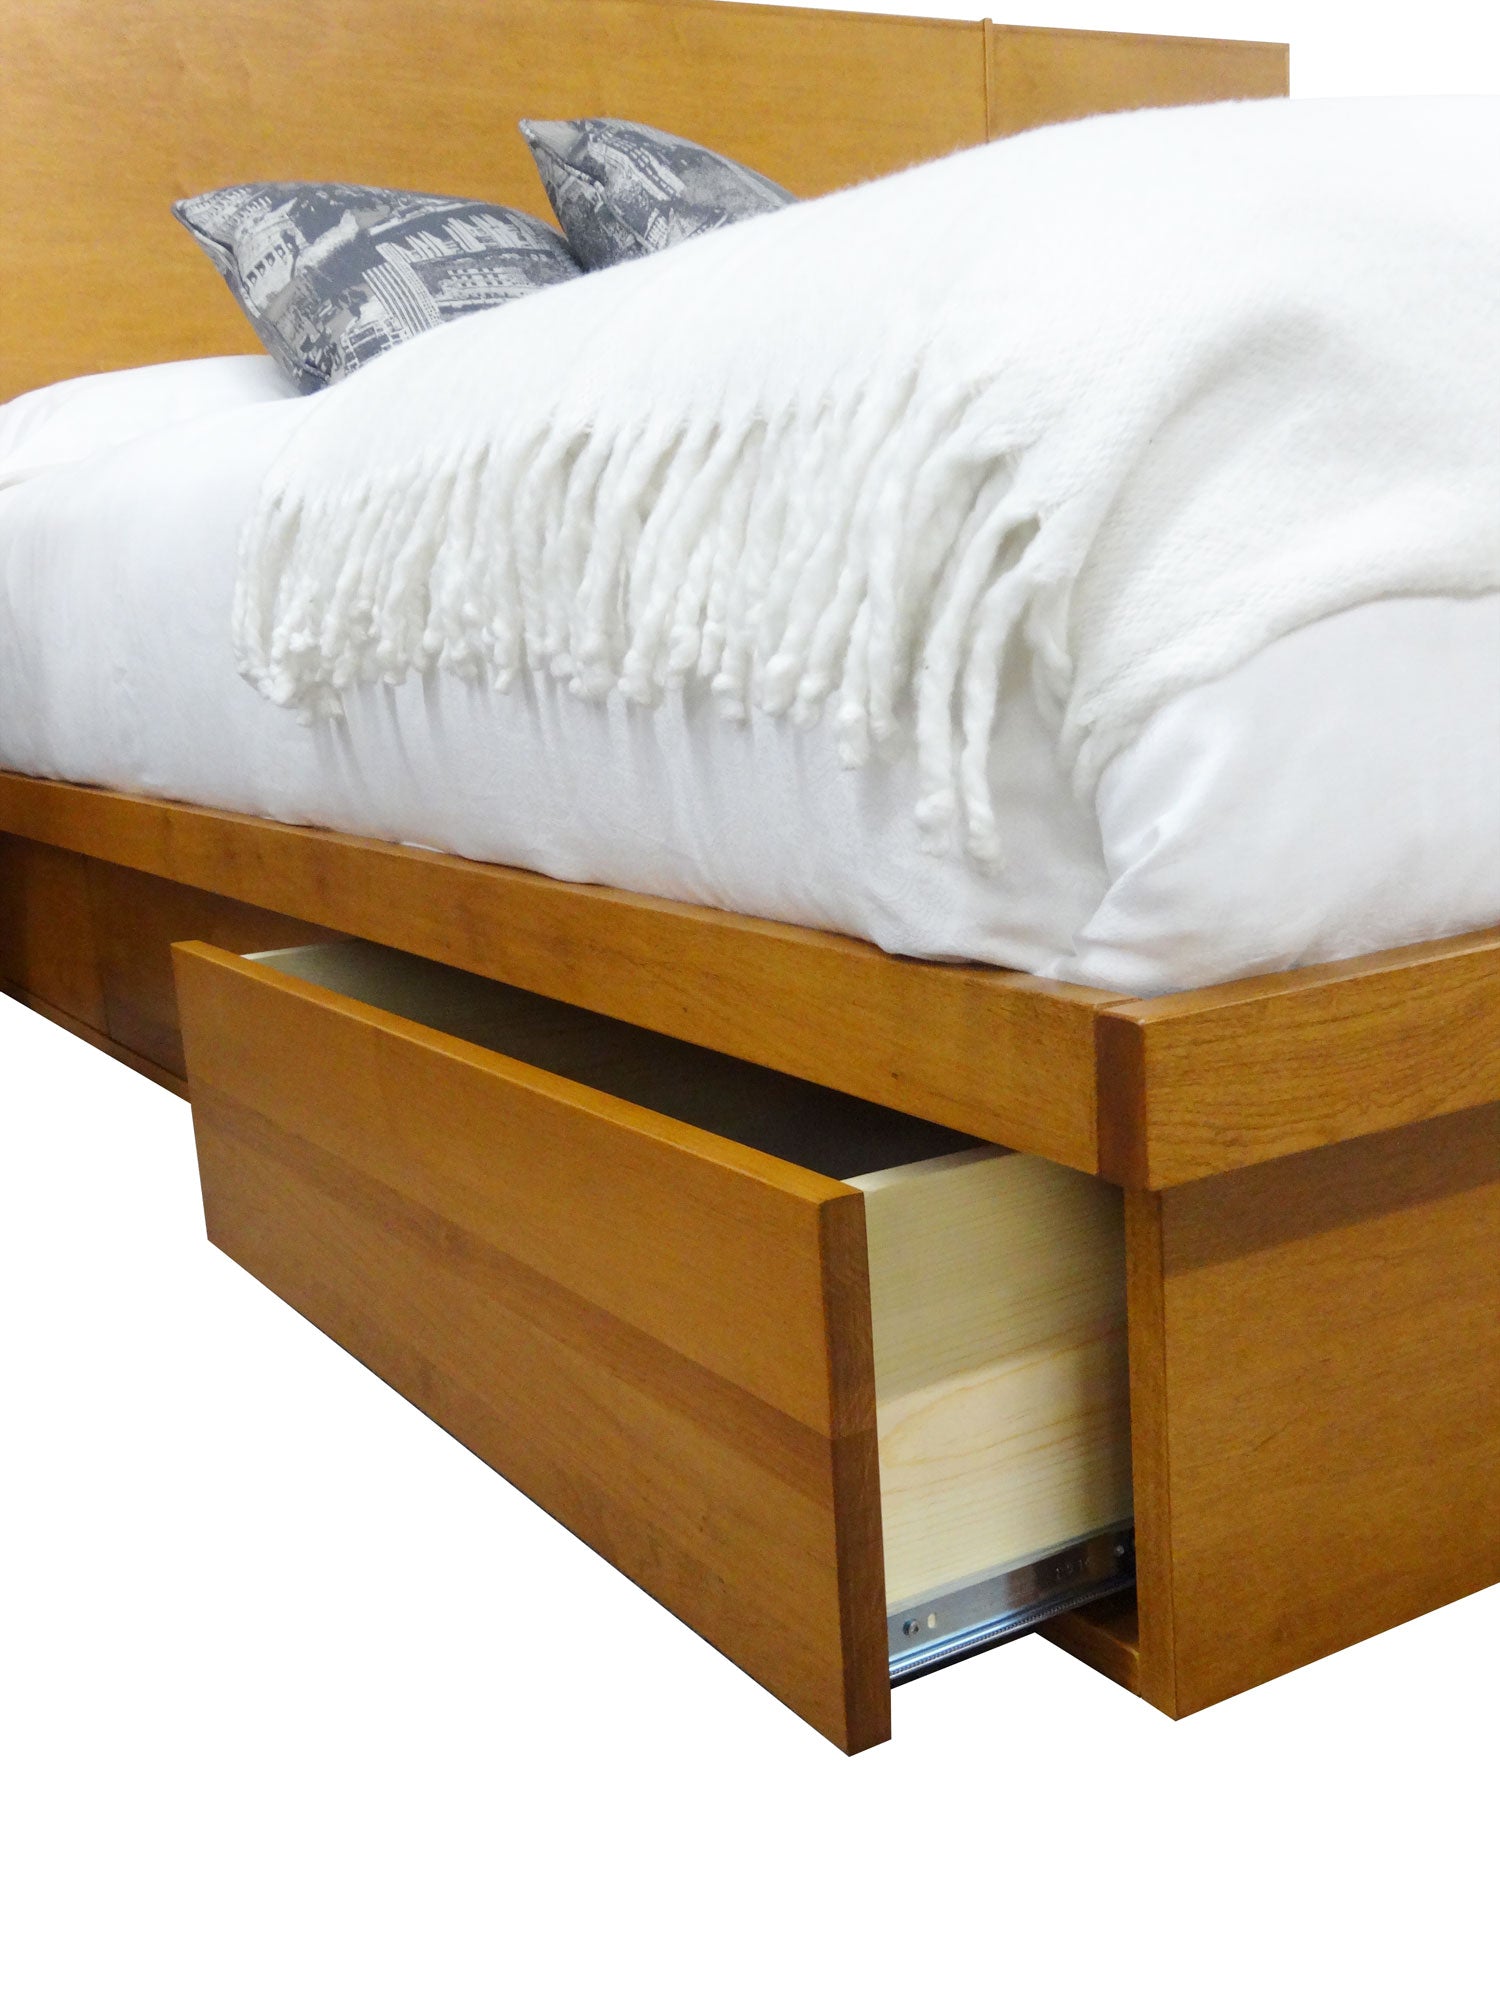 Muse LA Storage Bed - close up with open drawers